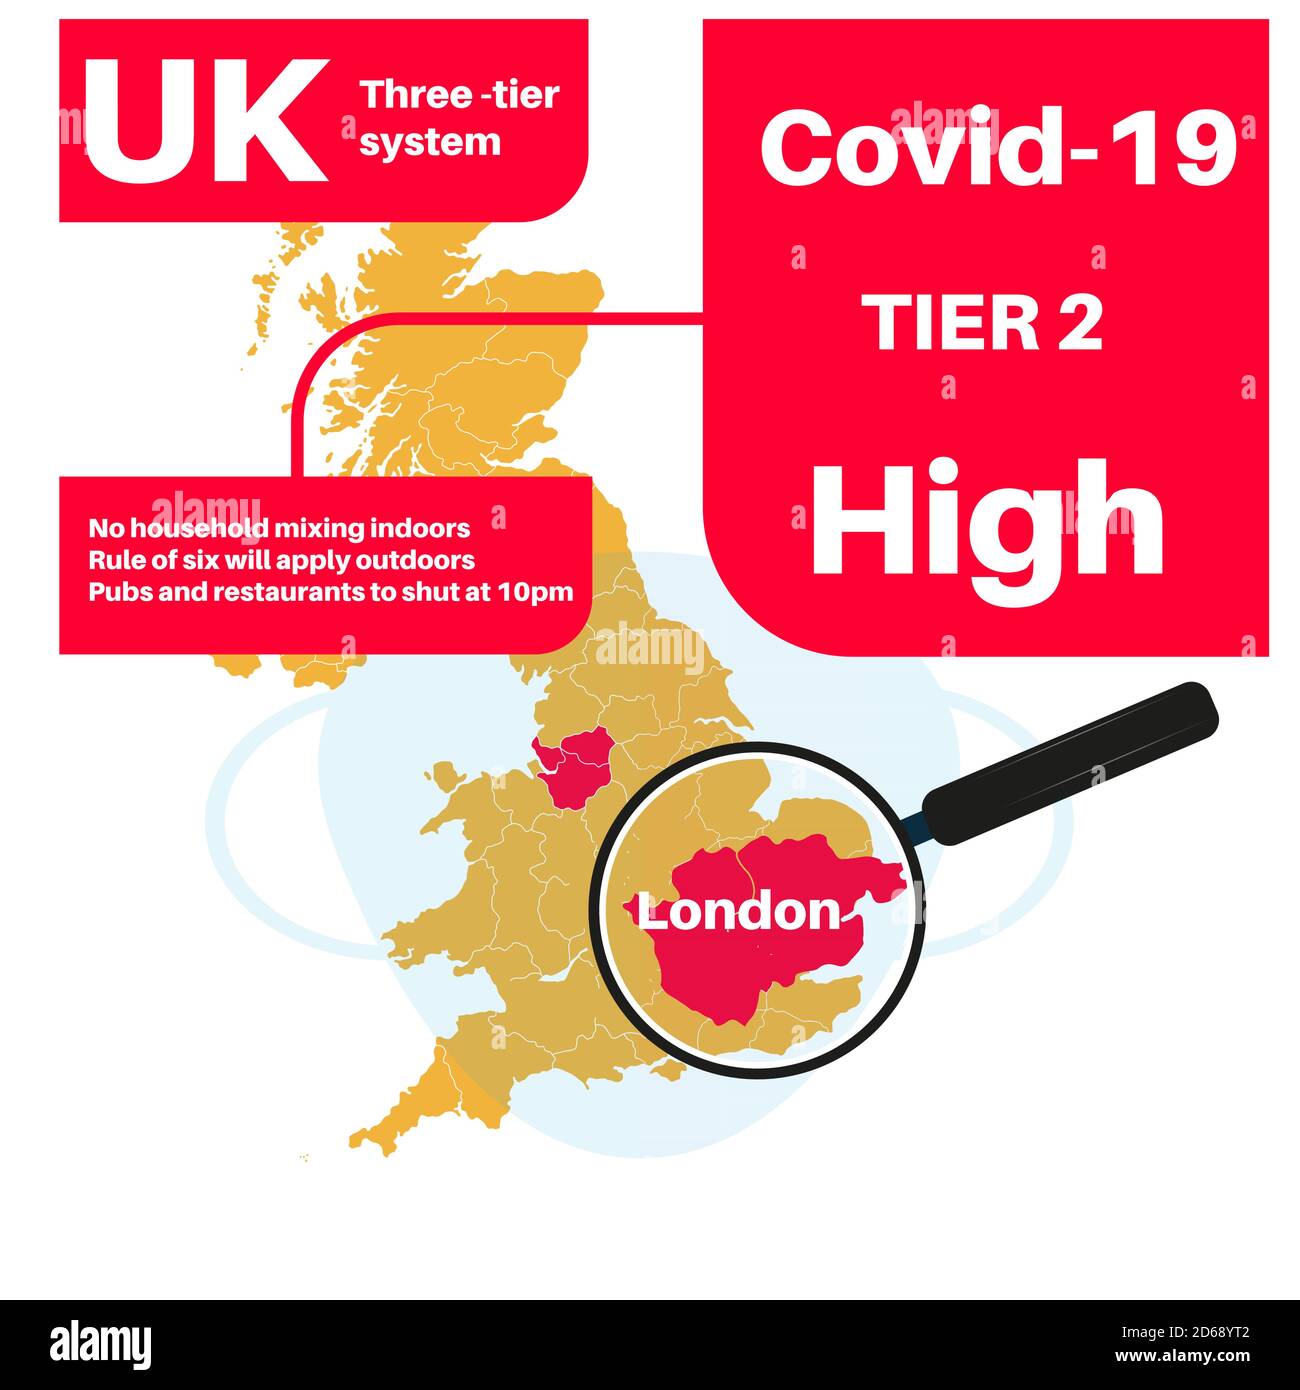 London Tier 2 Covid-19 UK infection Level High with map and magnifying glass. Stock Vector